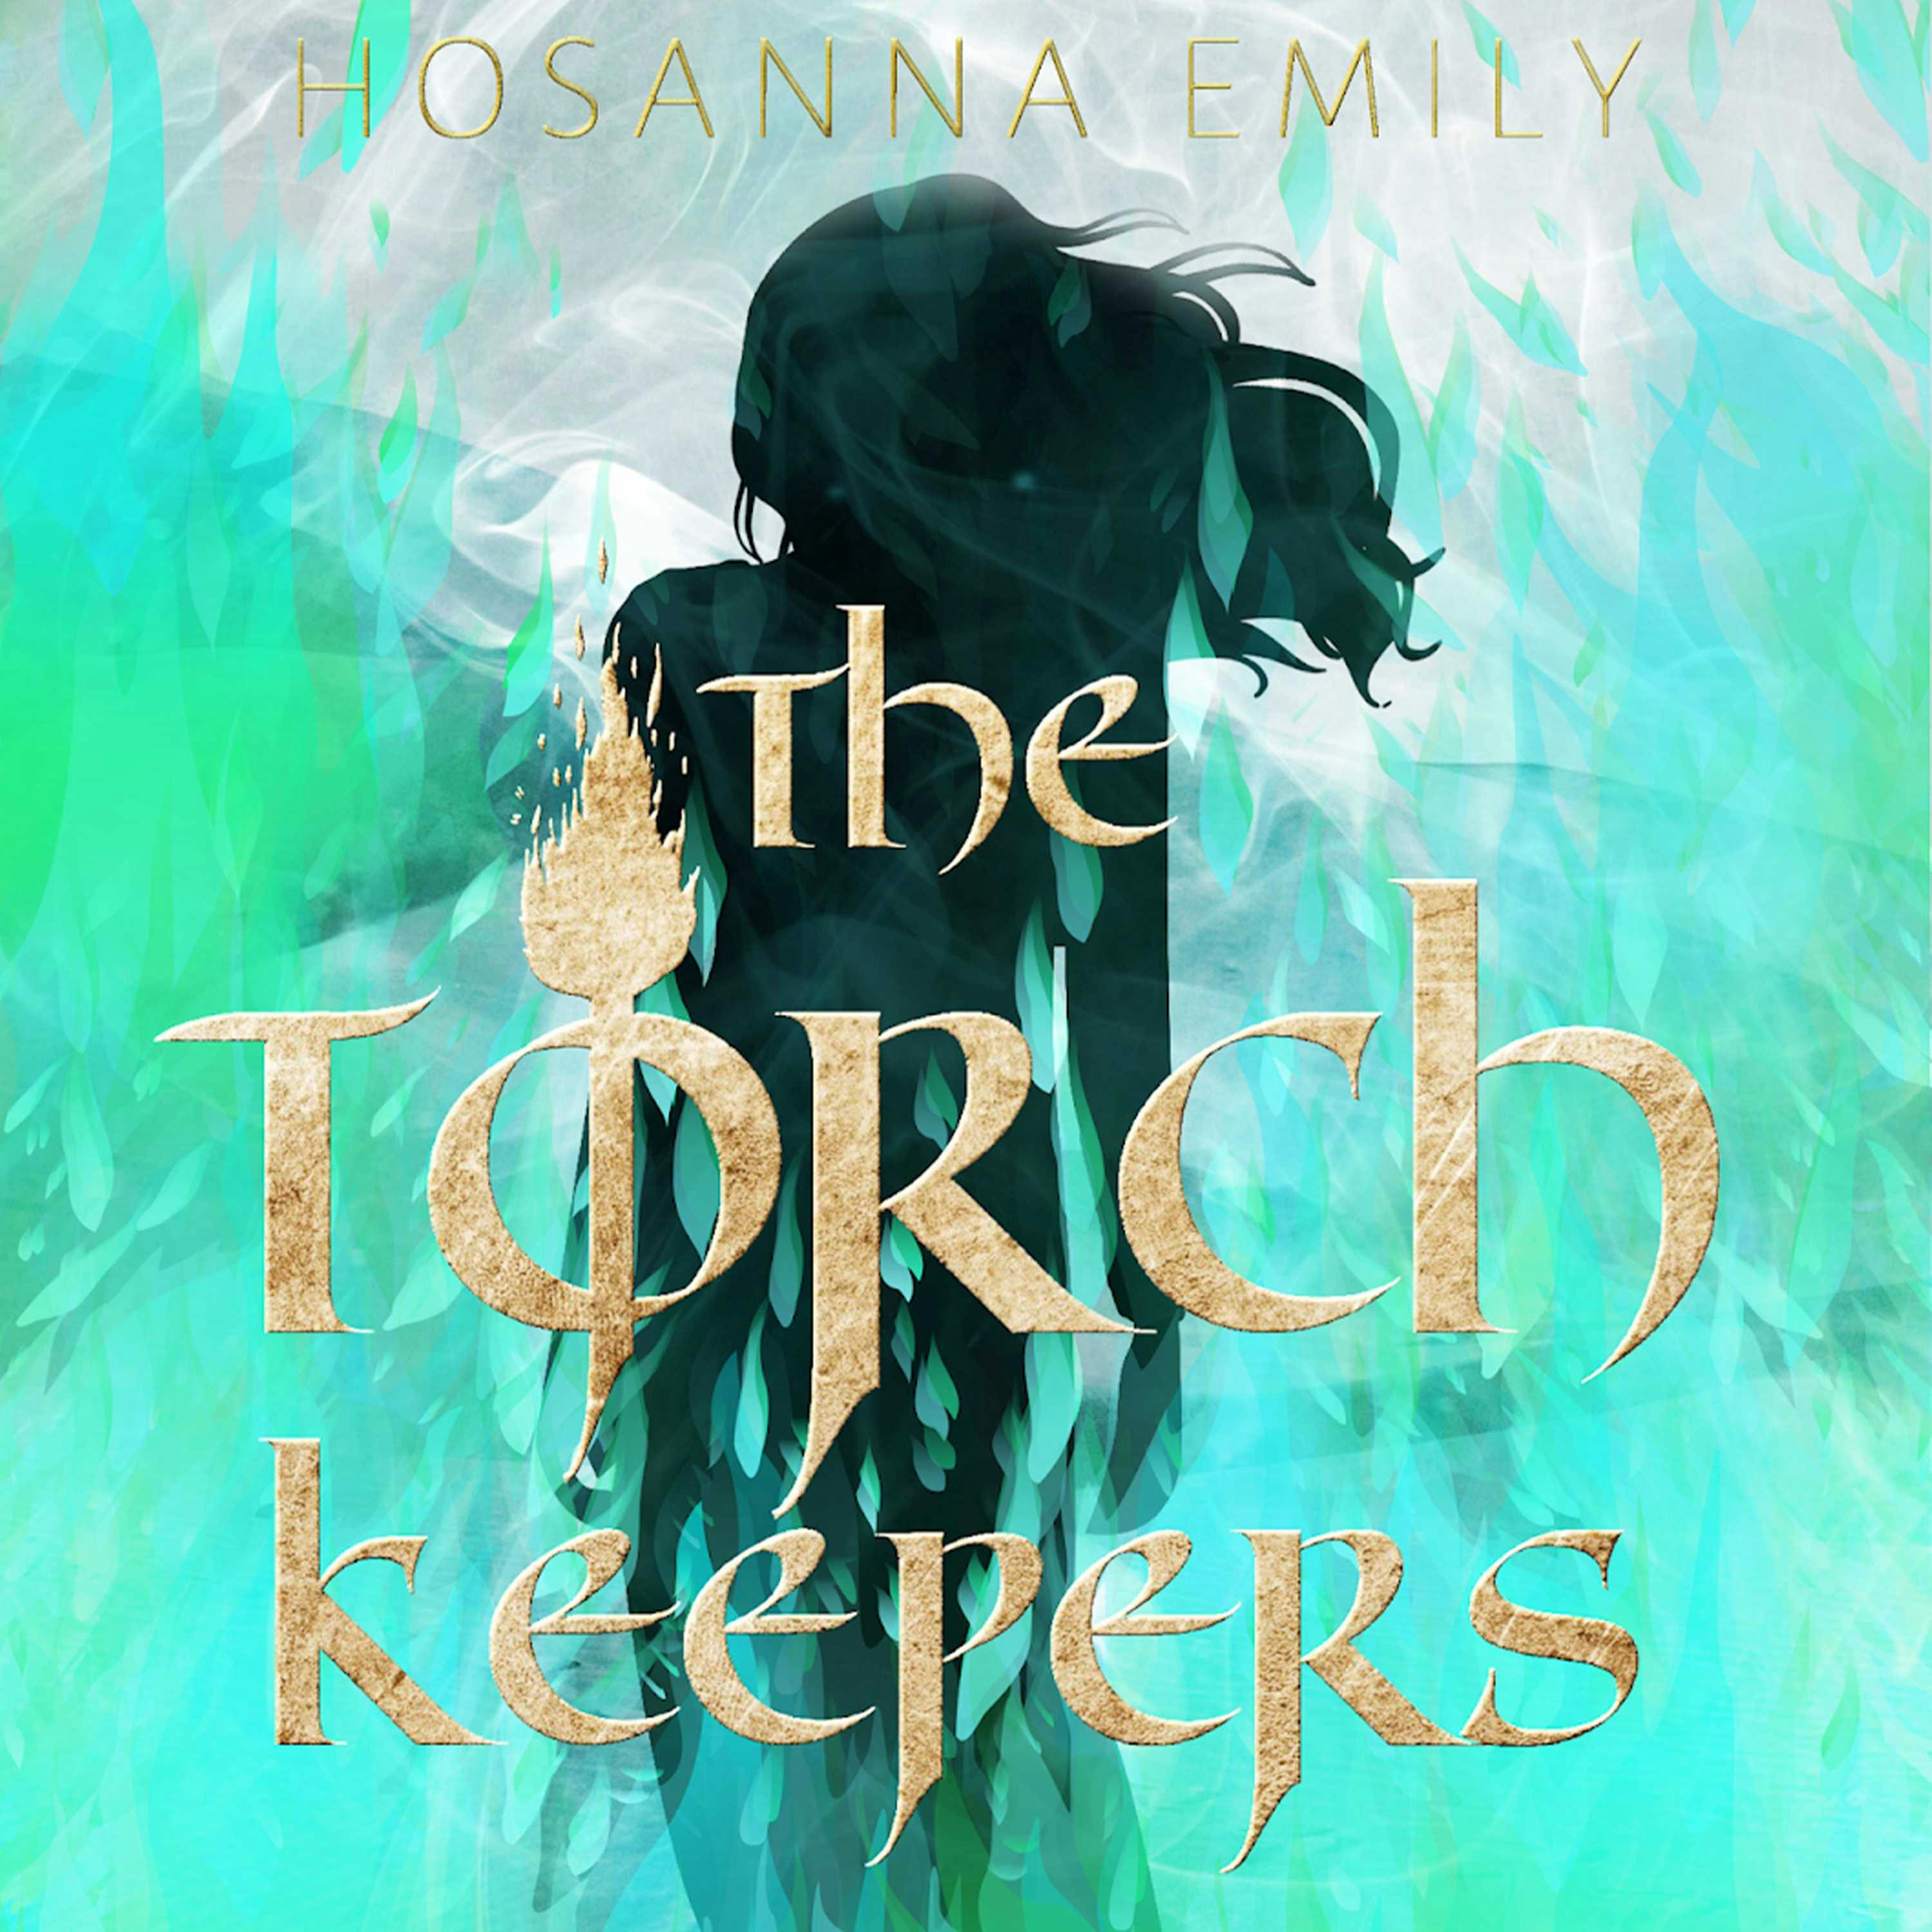 The Torch Keepers - Hosanna Emily